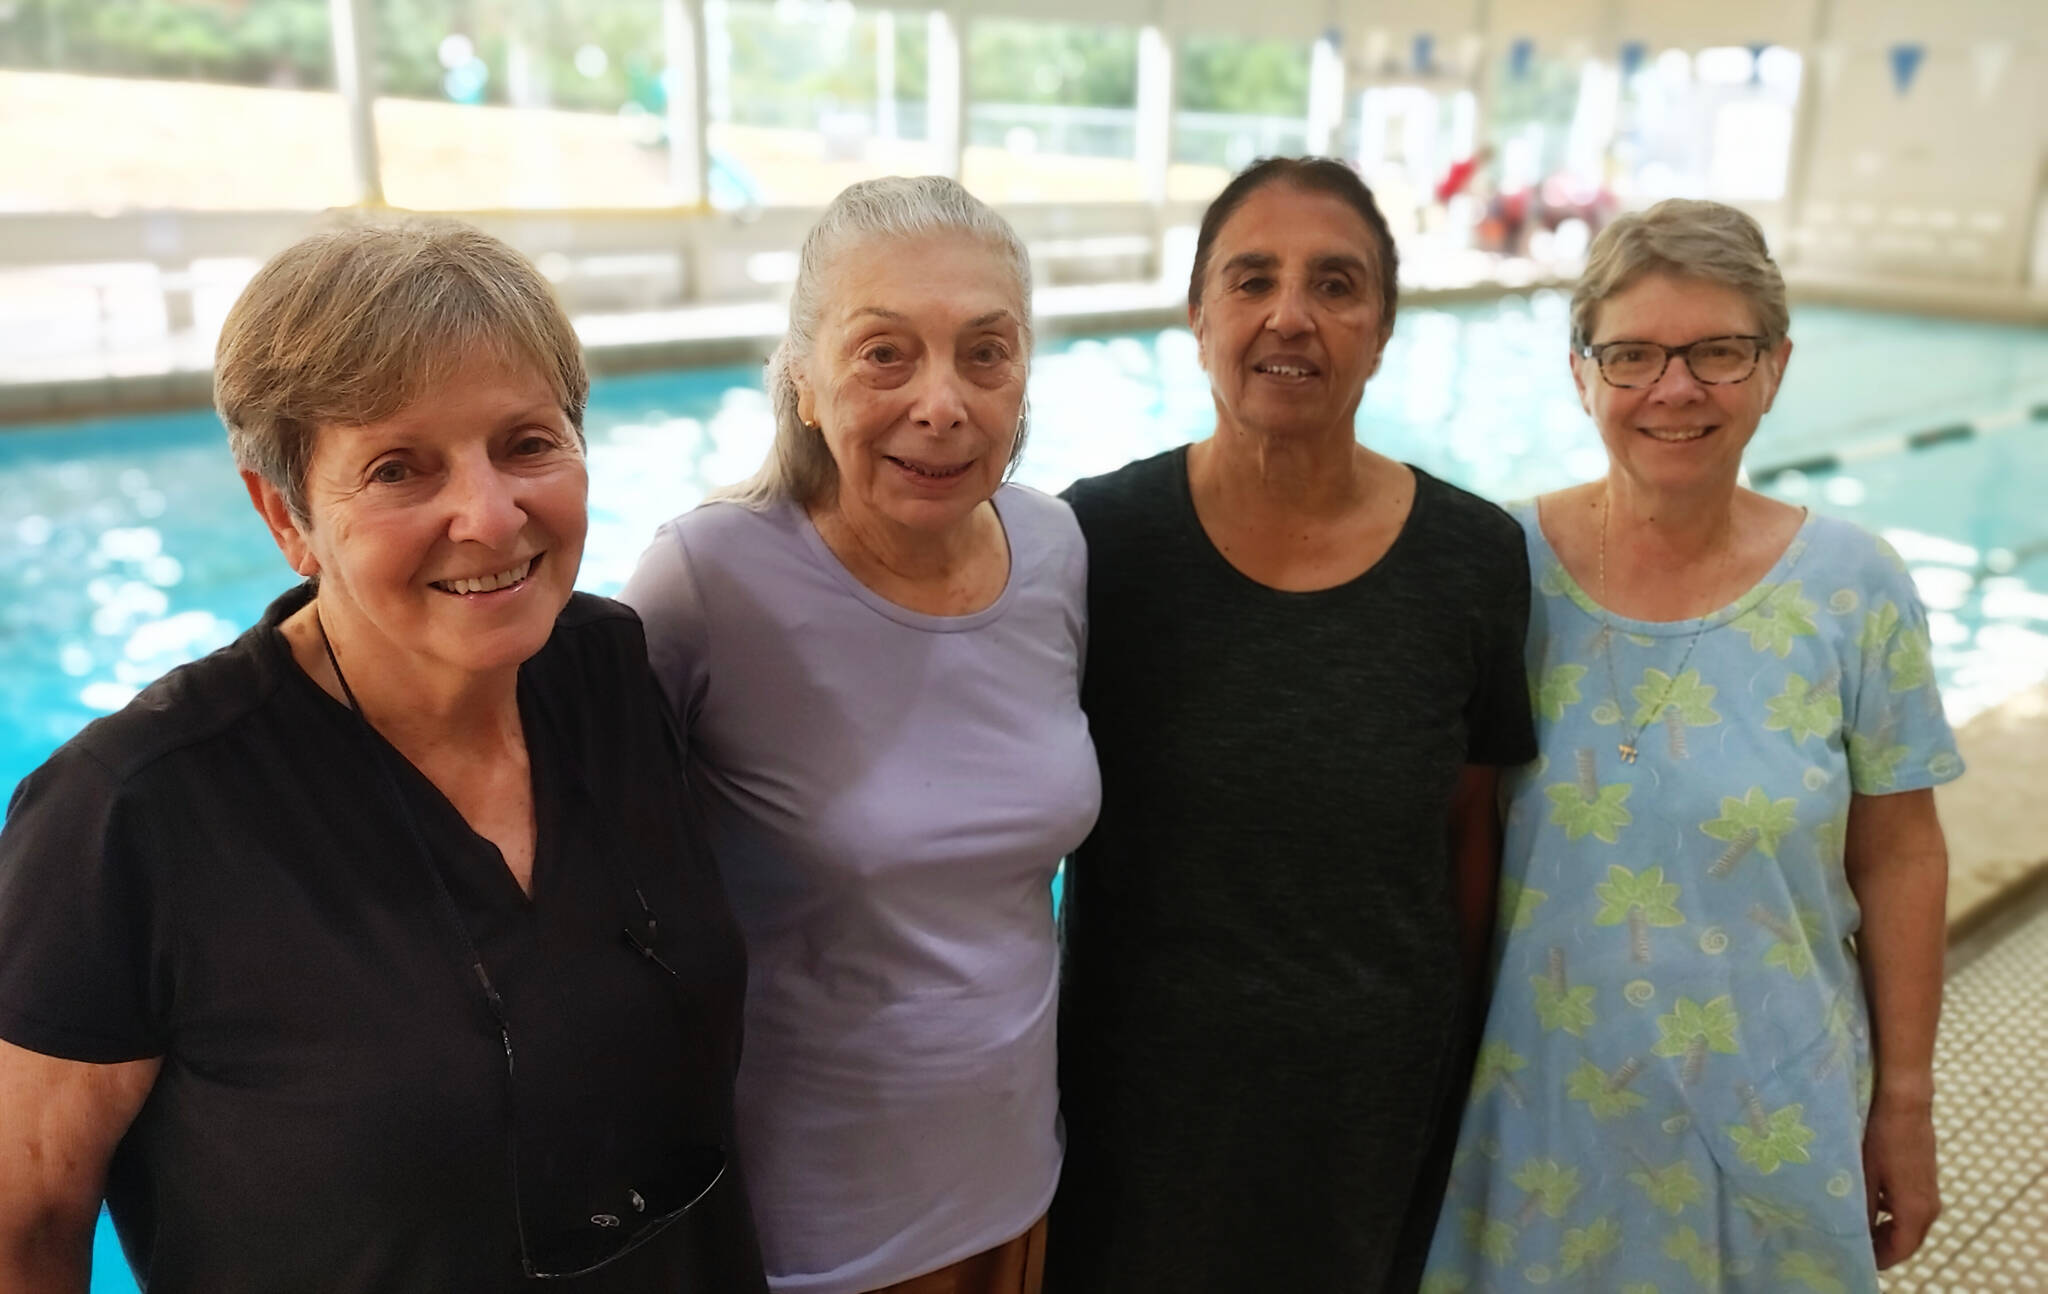 Stroum Jewish Community Center Aqua Fit friends, from left to right: Morrene Jacobson, Toby Franco, Pallu Shah and Pam Feinstein. Andy Nystrom/ staff photo